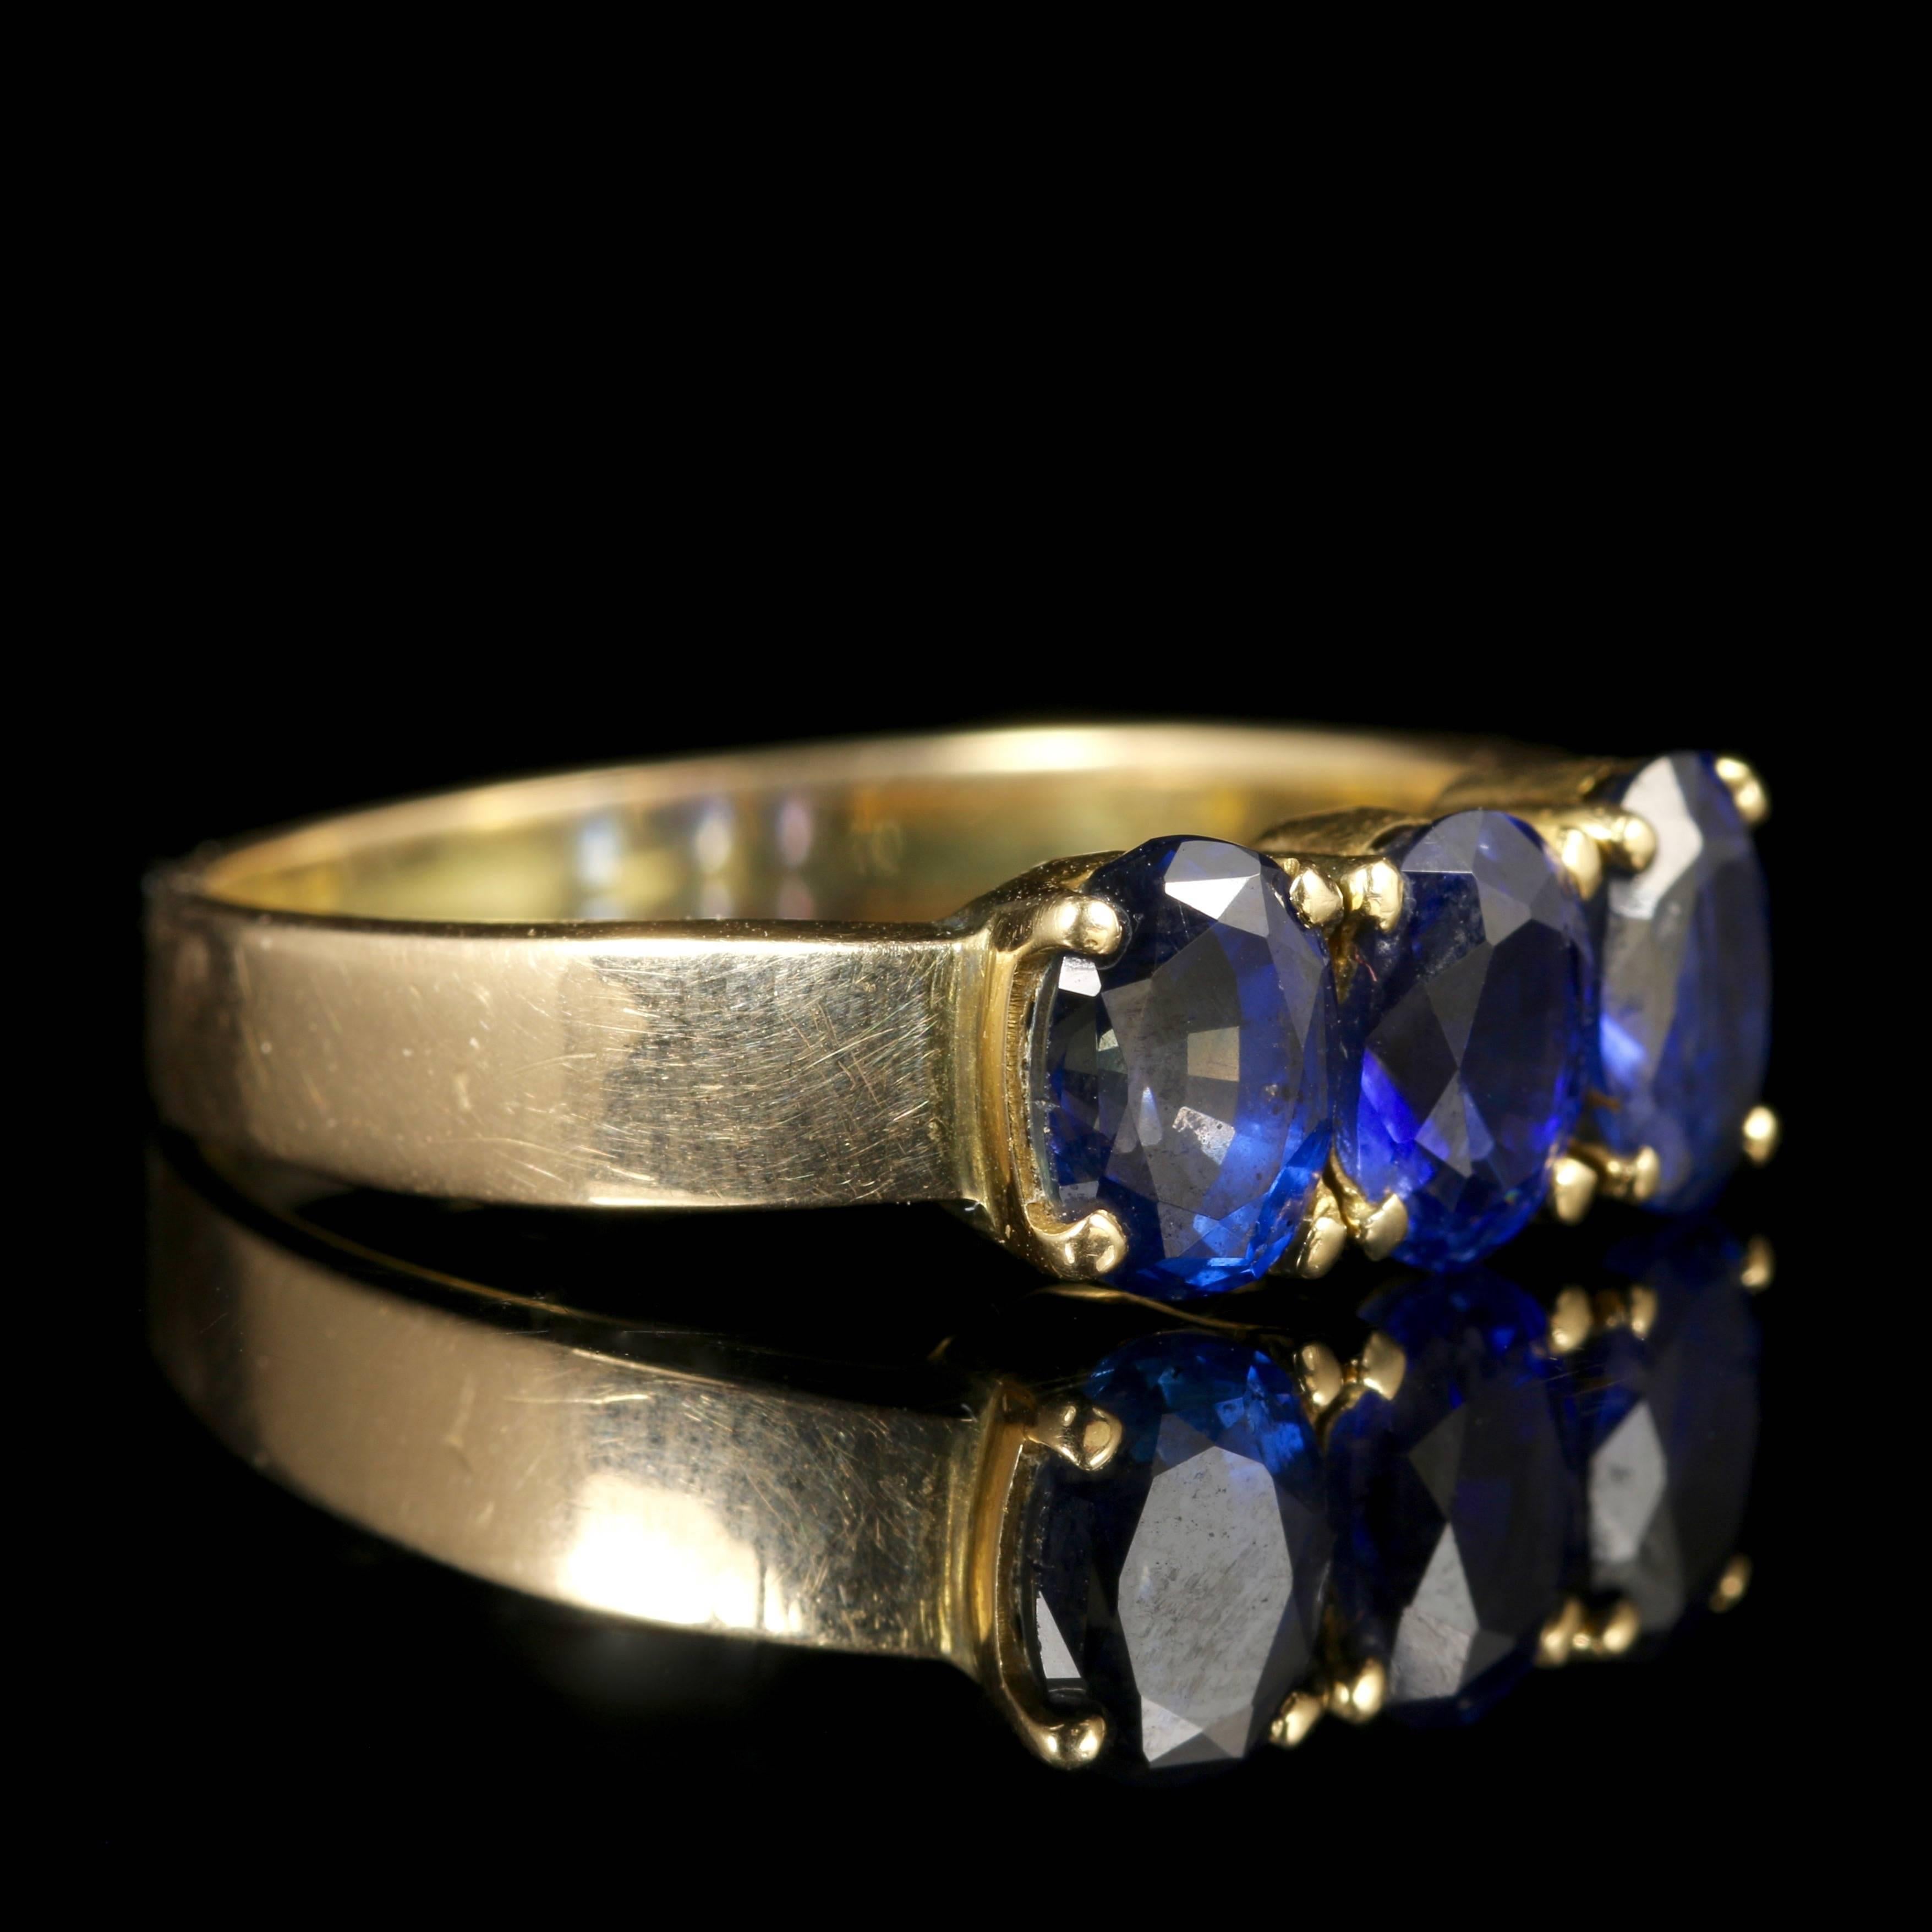 This fabulous Victorian trilogy ring boasts stunning rich Blue Sapphires all set in 18ct Yellow Gold.

A trilogy of Blue Sapphires sits across the centre of the ring complimenting the 18ct Yellow Gold. 

Trilogy stands for past, present and future,